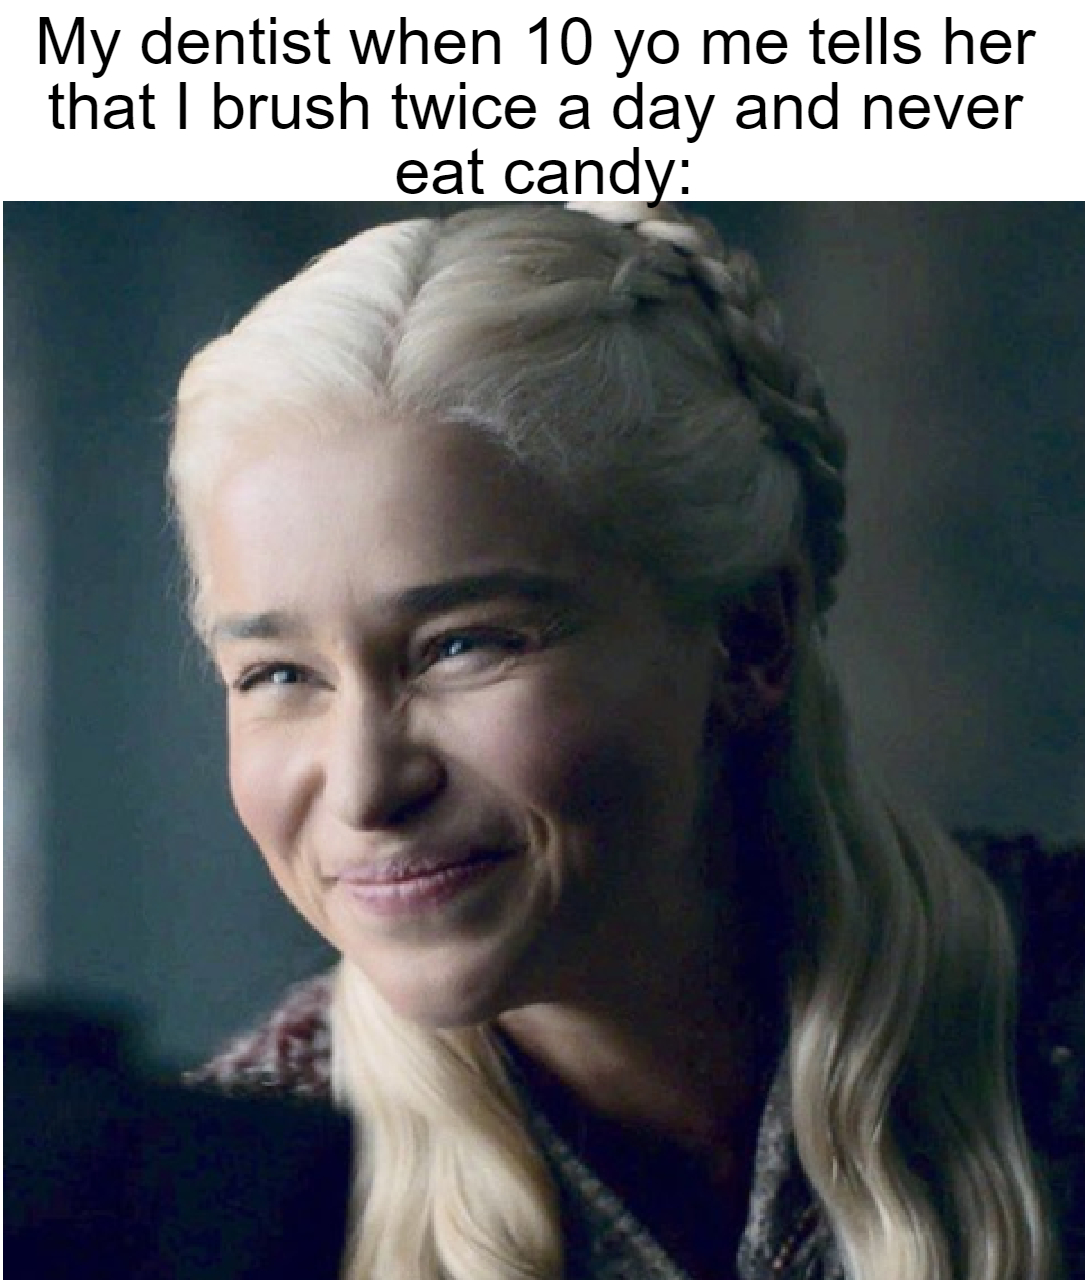 dank memes - funny memes - game of thrones daenerys meme - My dentist when 10 yo me tells her that I brush twice a day and never eat candy